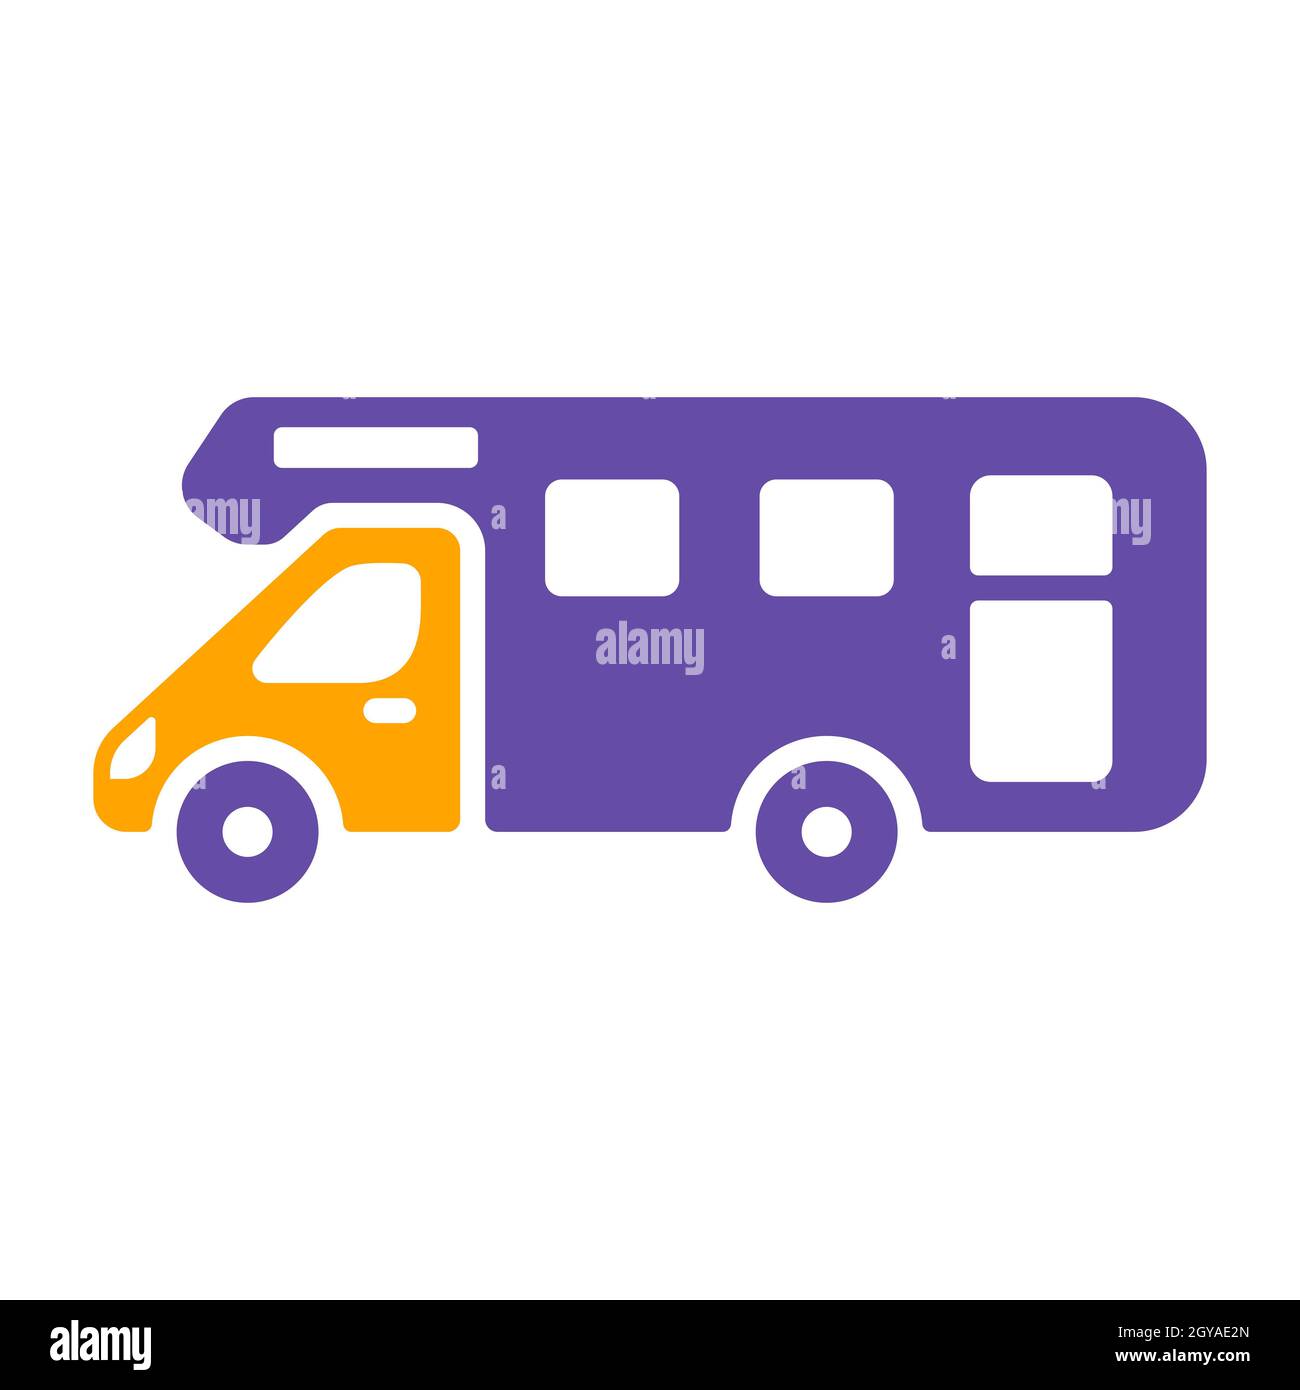 Mobile home Motor home Caravan Trailer Vehicle flat vector glyph icon. Graph symbol for travel and tourism web site and apps design, logo, app, UI Stock Photo